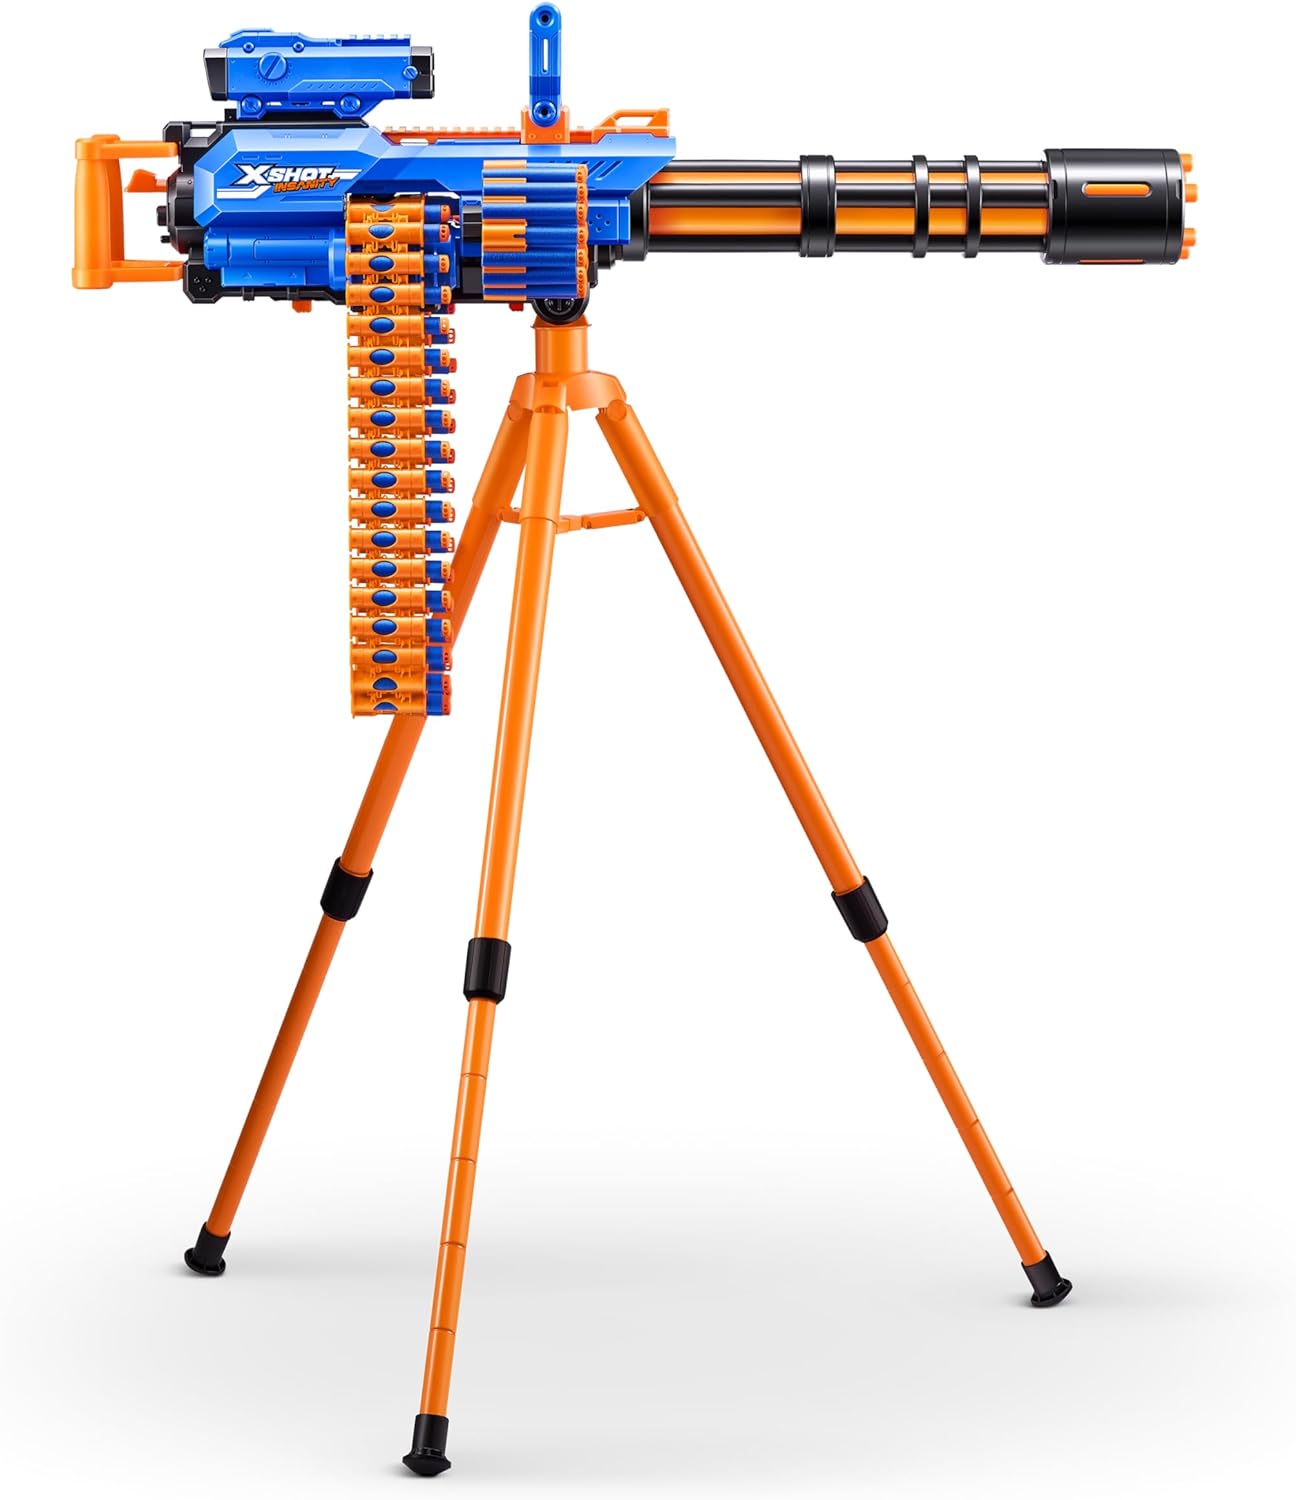 X Shot Insanity Motorised Gatling Blaster with Tripod Stand Includes 72 Darts